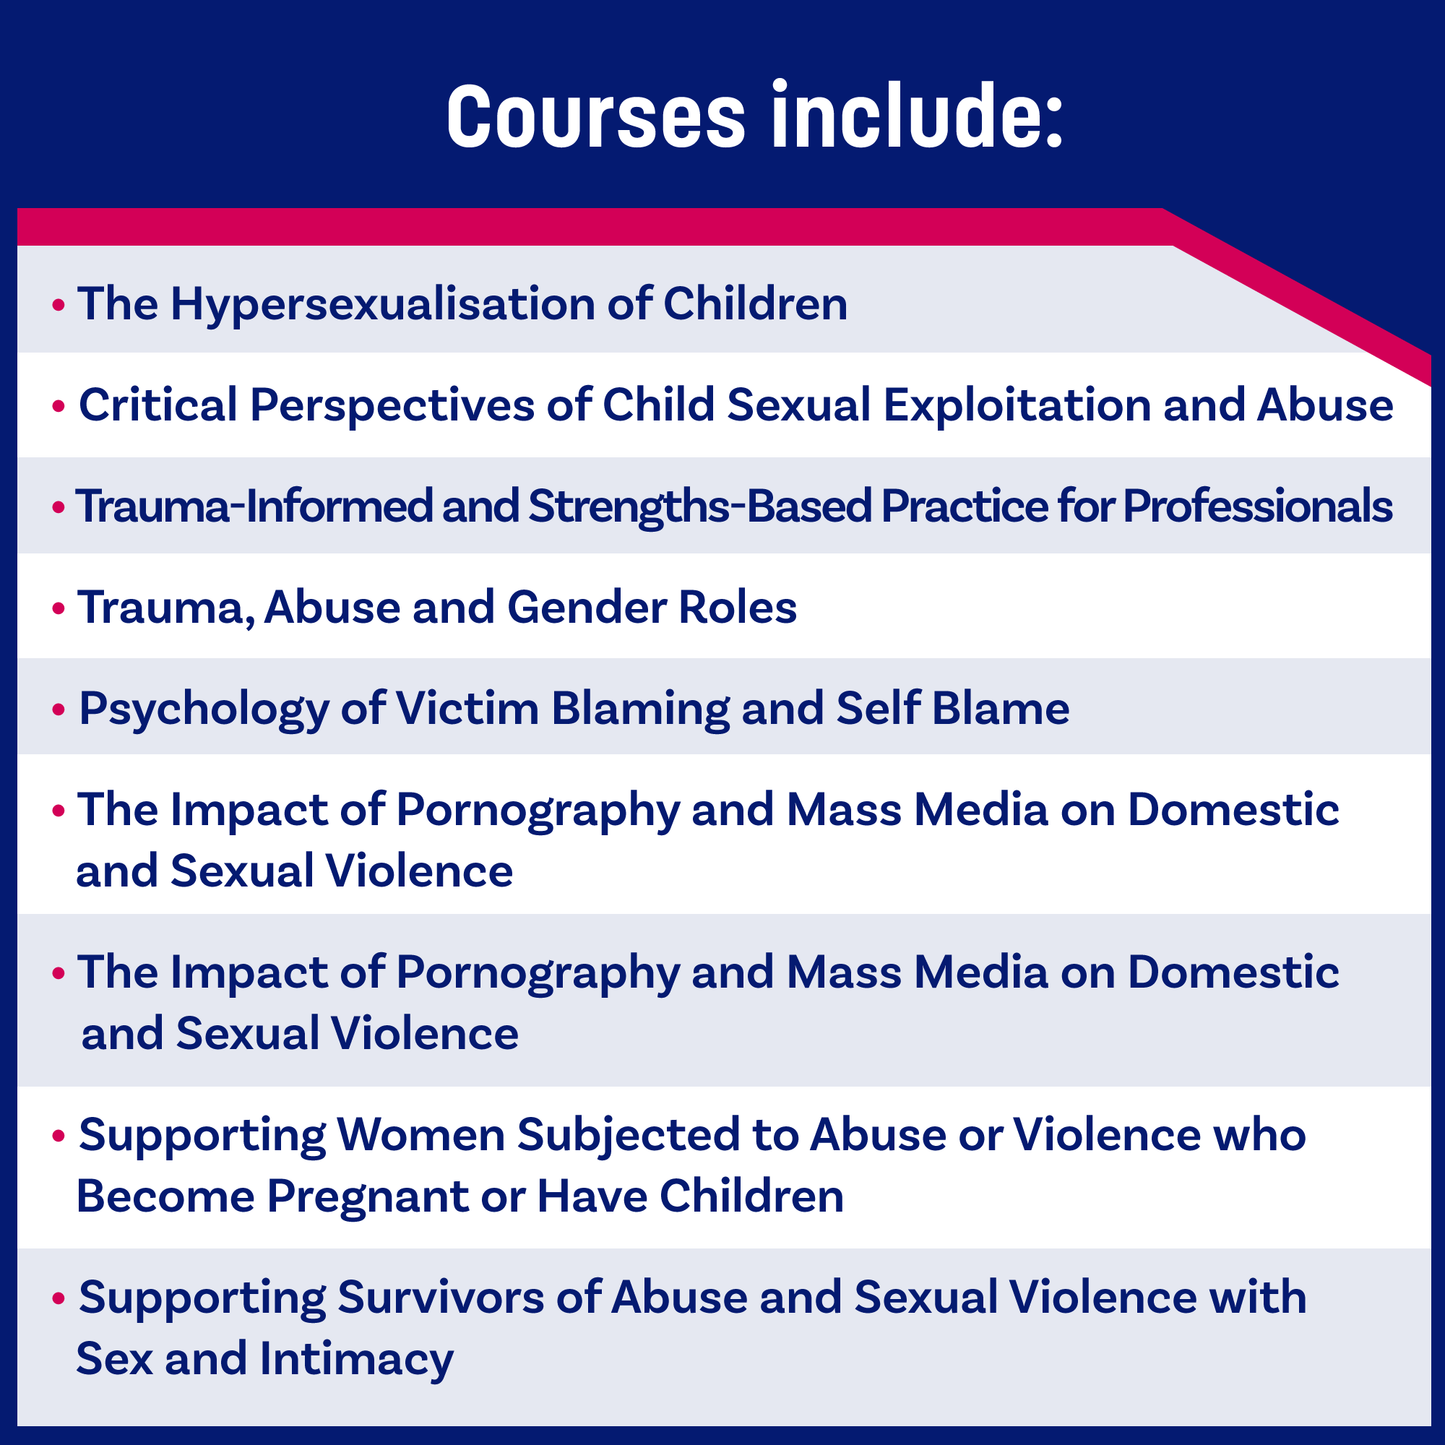 VictimFocus Academy Unlimited Access to All Courses For One Year £349.00